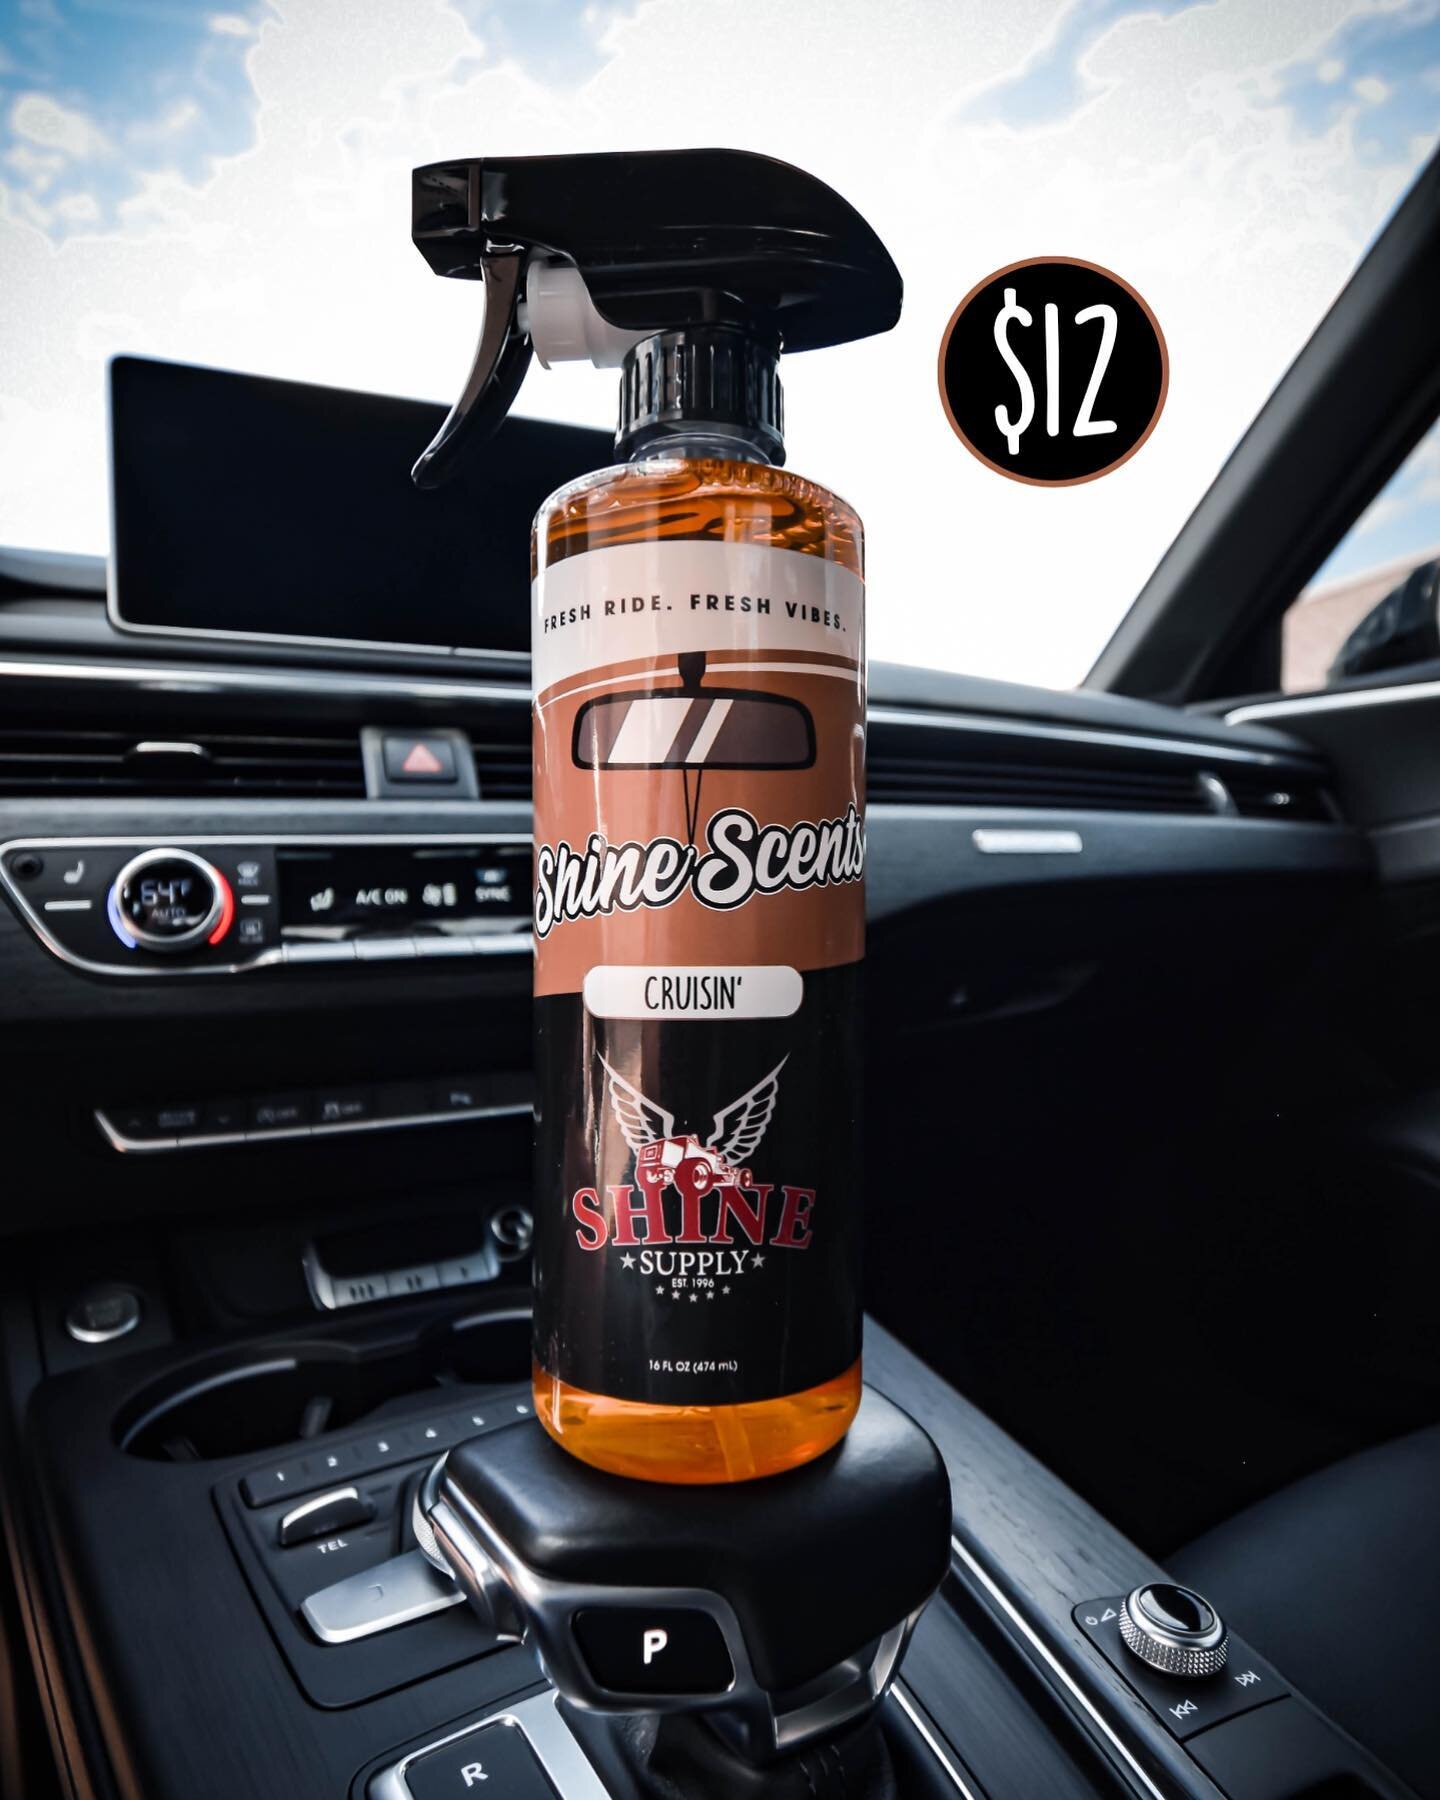 Cruisin&rsquo; has landed! This sandalwood scented air freshener provides the same intoxicating aroma as our Cruise Matte Interior Detailer.
&zwnj;
Spray a small amount on your vehicles carpeting and upholstery and enjoy the relaxing scent for 24-48 